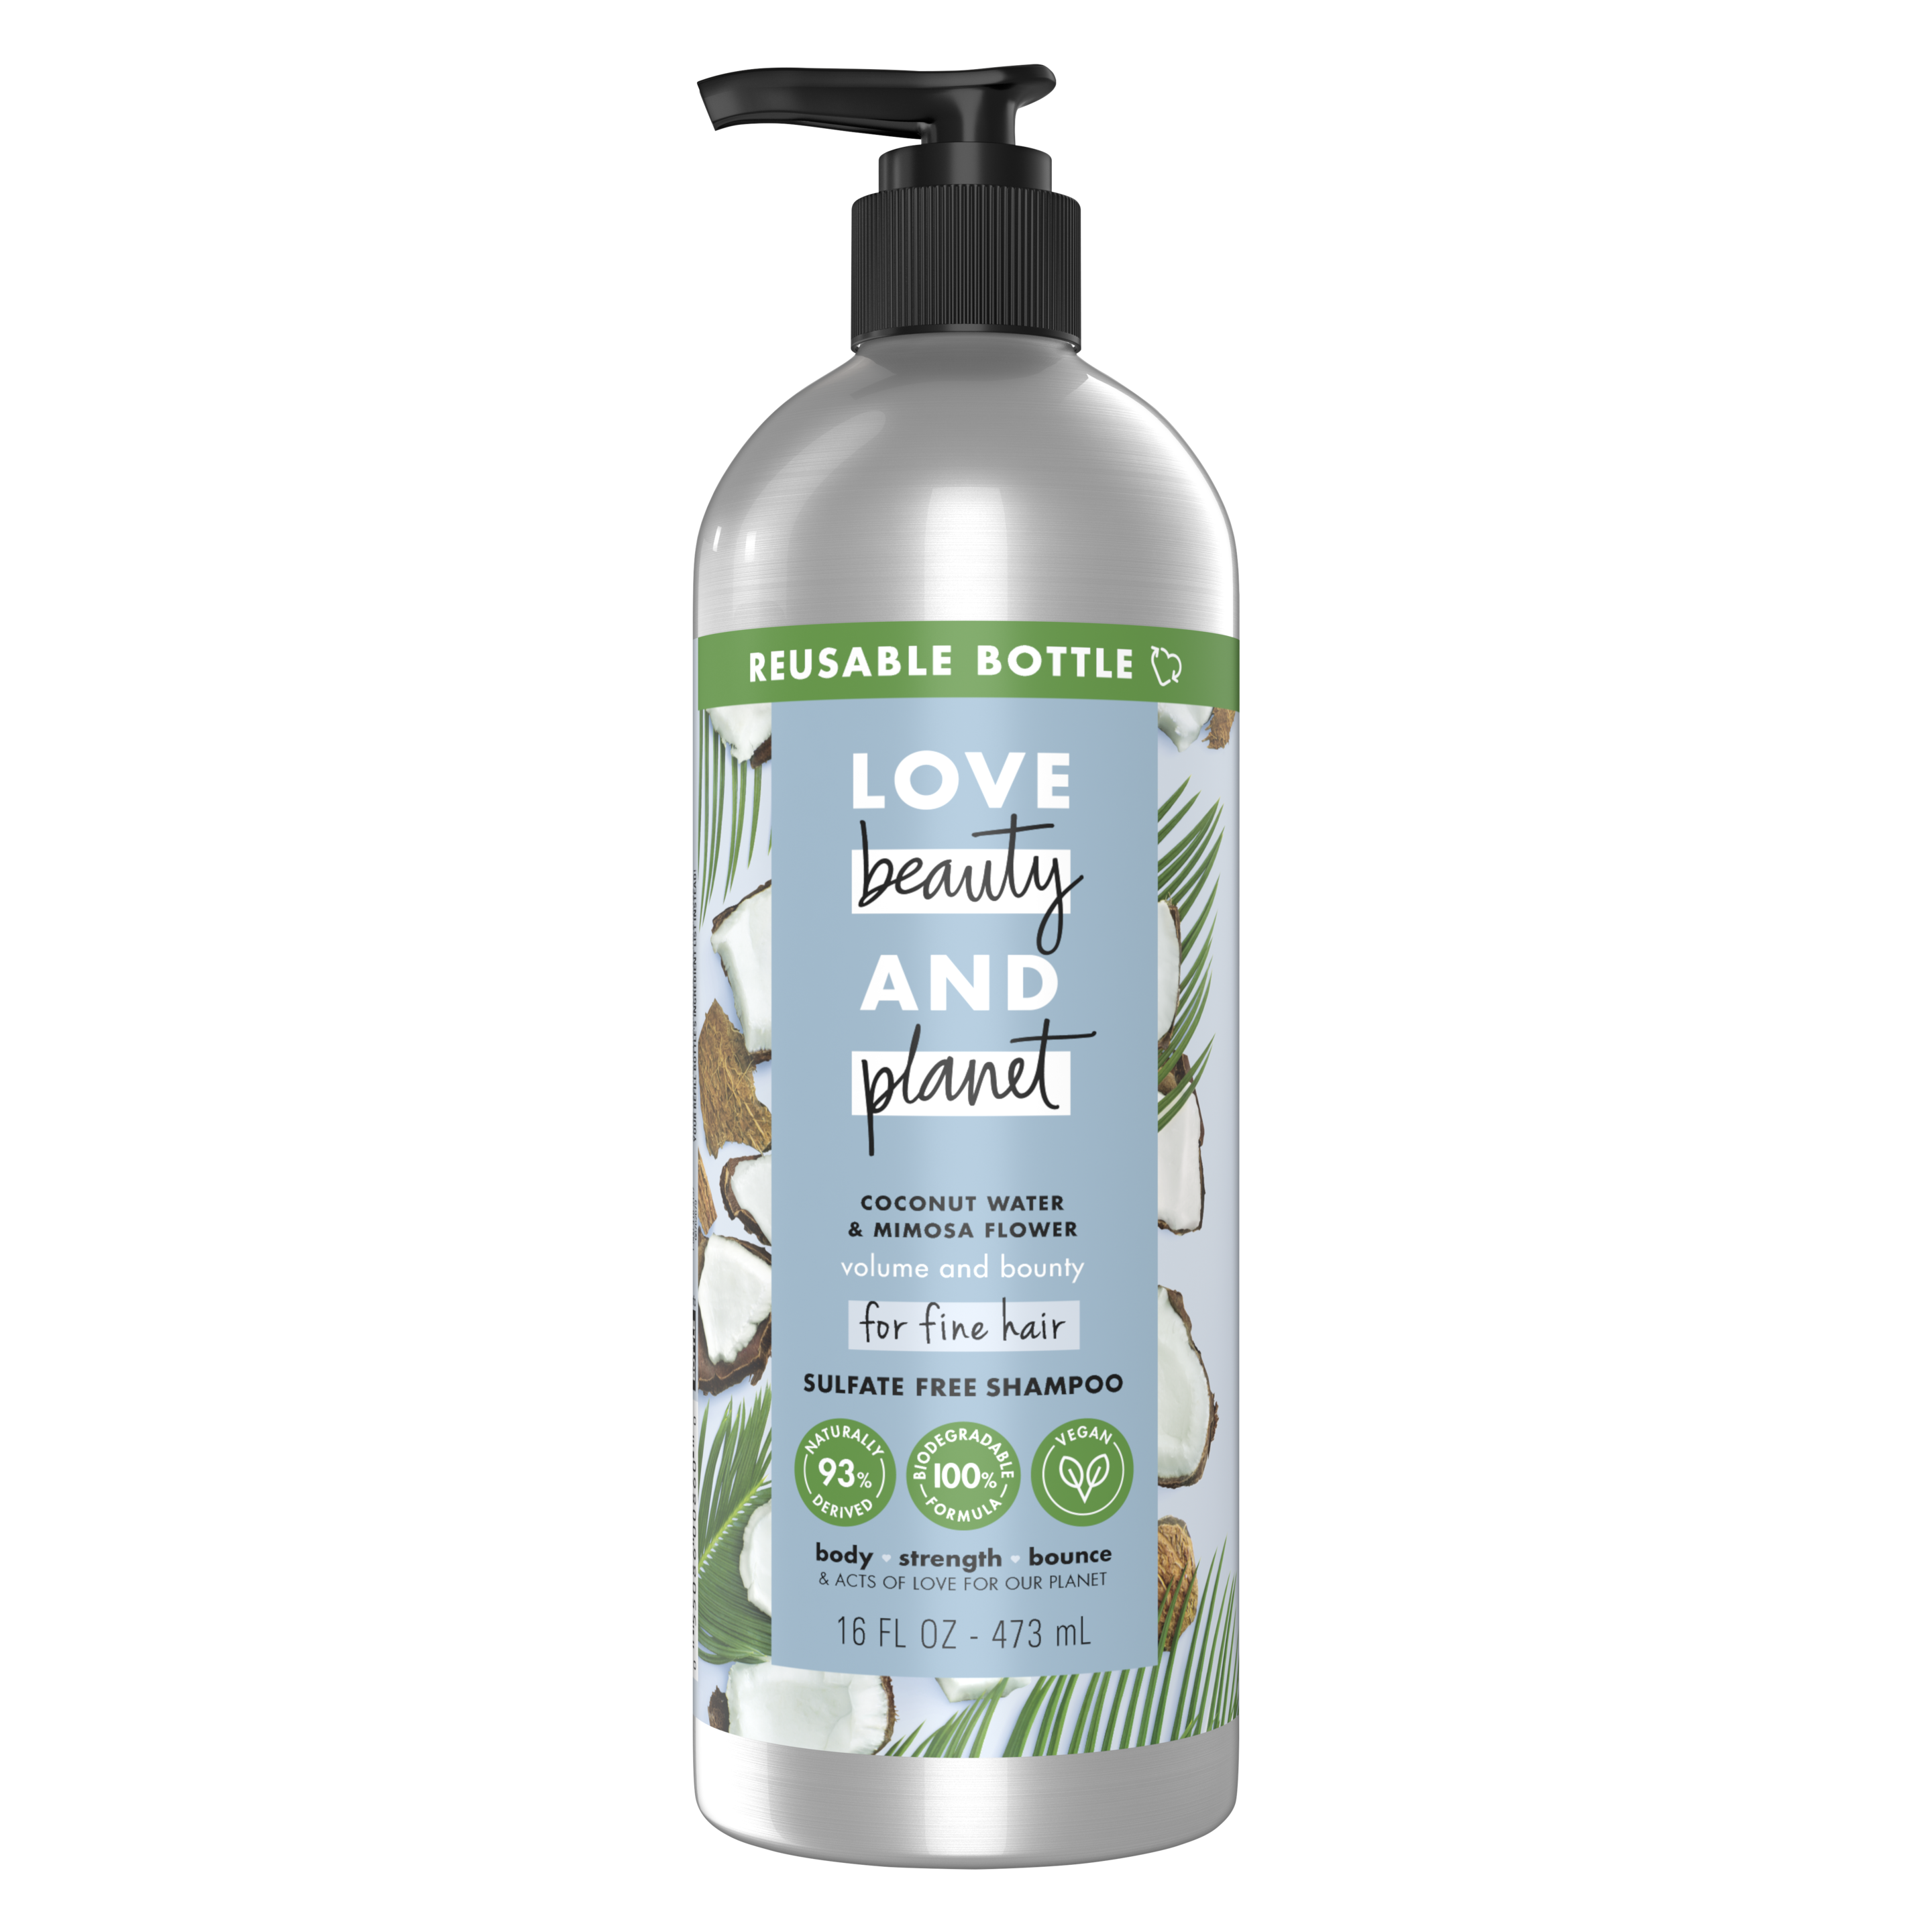 sulfate-free coconut water & mimosa flower shampoo reusable bottle